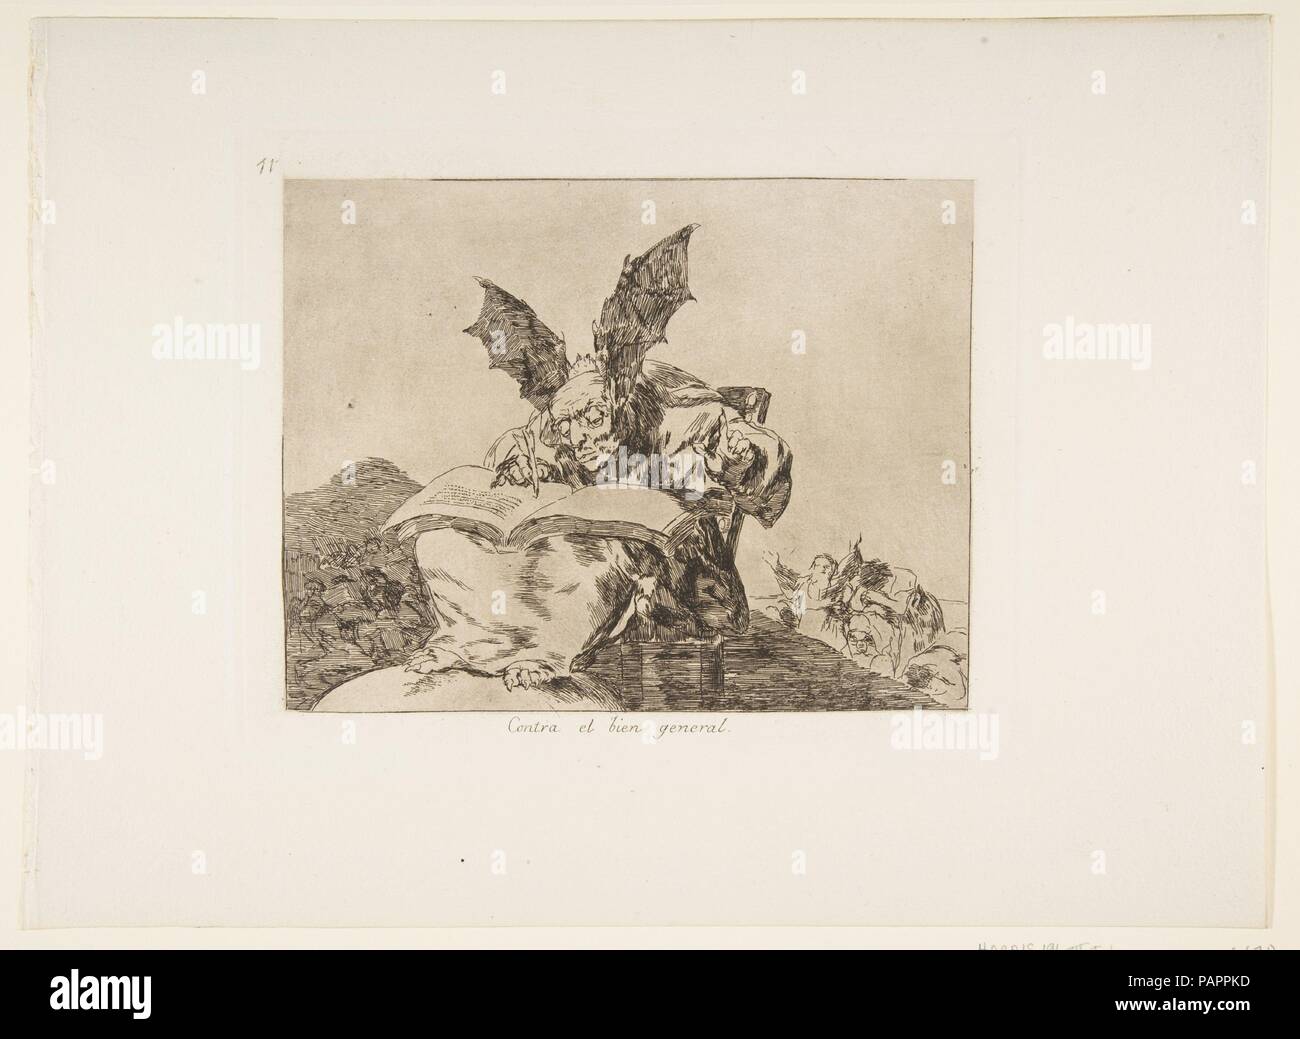 Plate 71  from 'The Disasters of War' (Los Desastres de la Guerra): 'Against the common good.' (Contra el bien general.). Artist: Goya (Francisco de Goya y Lucientes) (Spanish, Fuendetodos 1746-1828 Bordeaux). Dimensions: Plate: 6 7/8 × 8 11/16 in. (17.5 × 22 cm)  Sheet: 9 15/16 × 13 9/16 in. (25.2 × 34.5 cm). Series/Portfolio: The Disasters of War. Date: after 1814-15 (published 1863). Museum: Metropolitan Museum of Art, New York, USA. Stock Photo